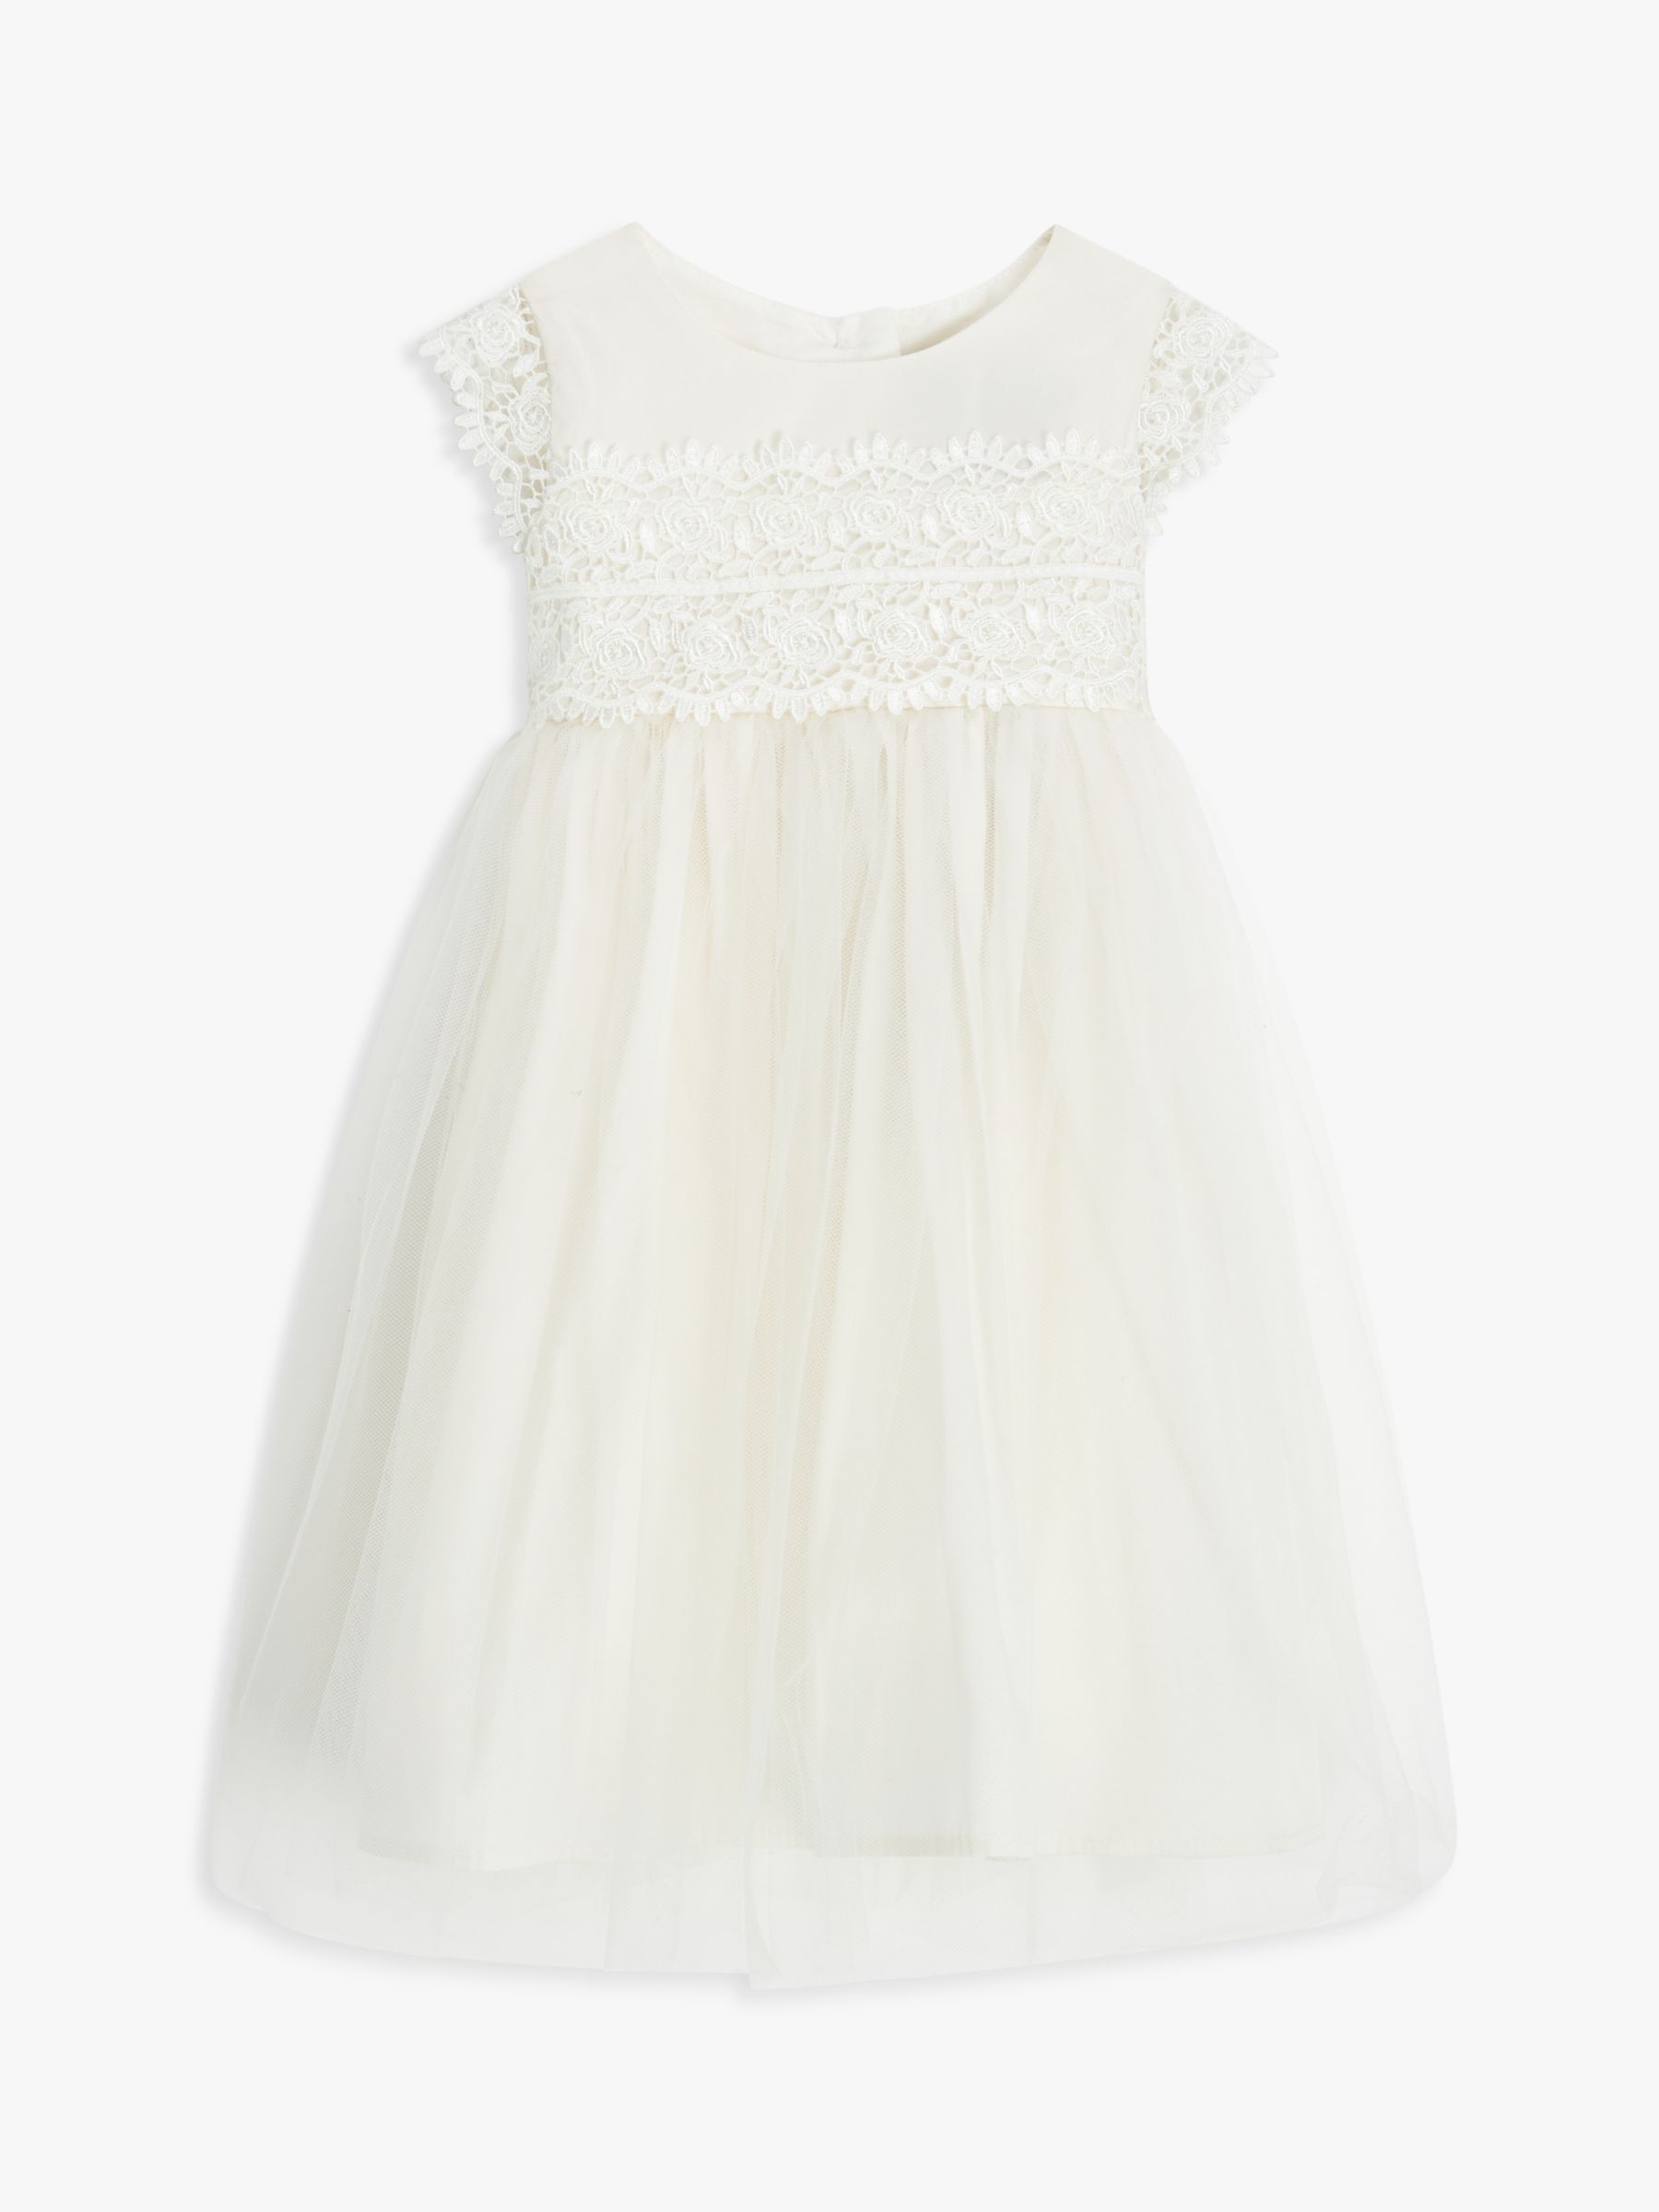 Christening Clothing | Baby Christening Gowns | John Lewis & Partners